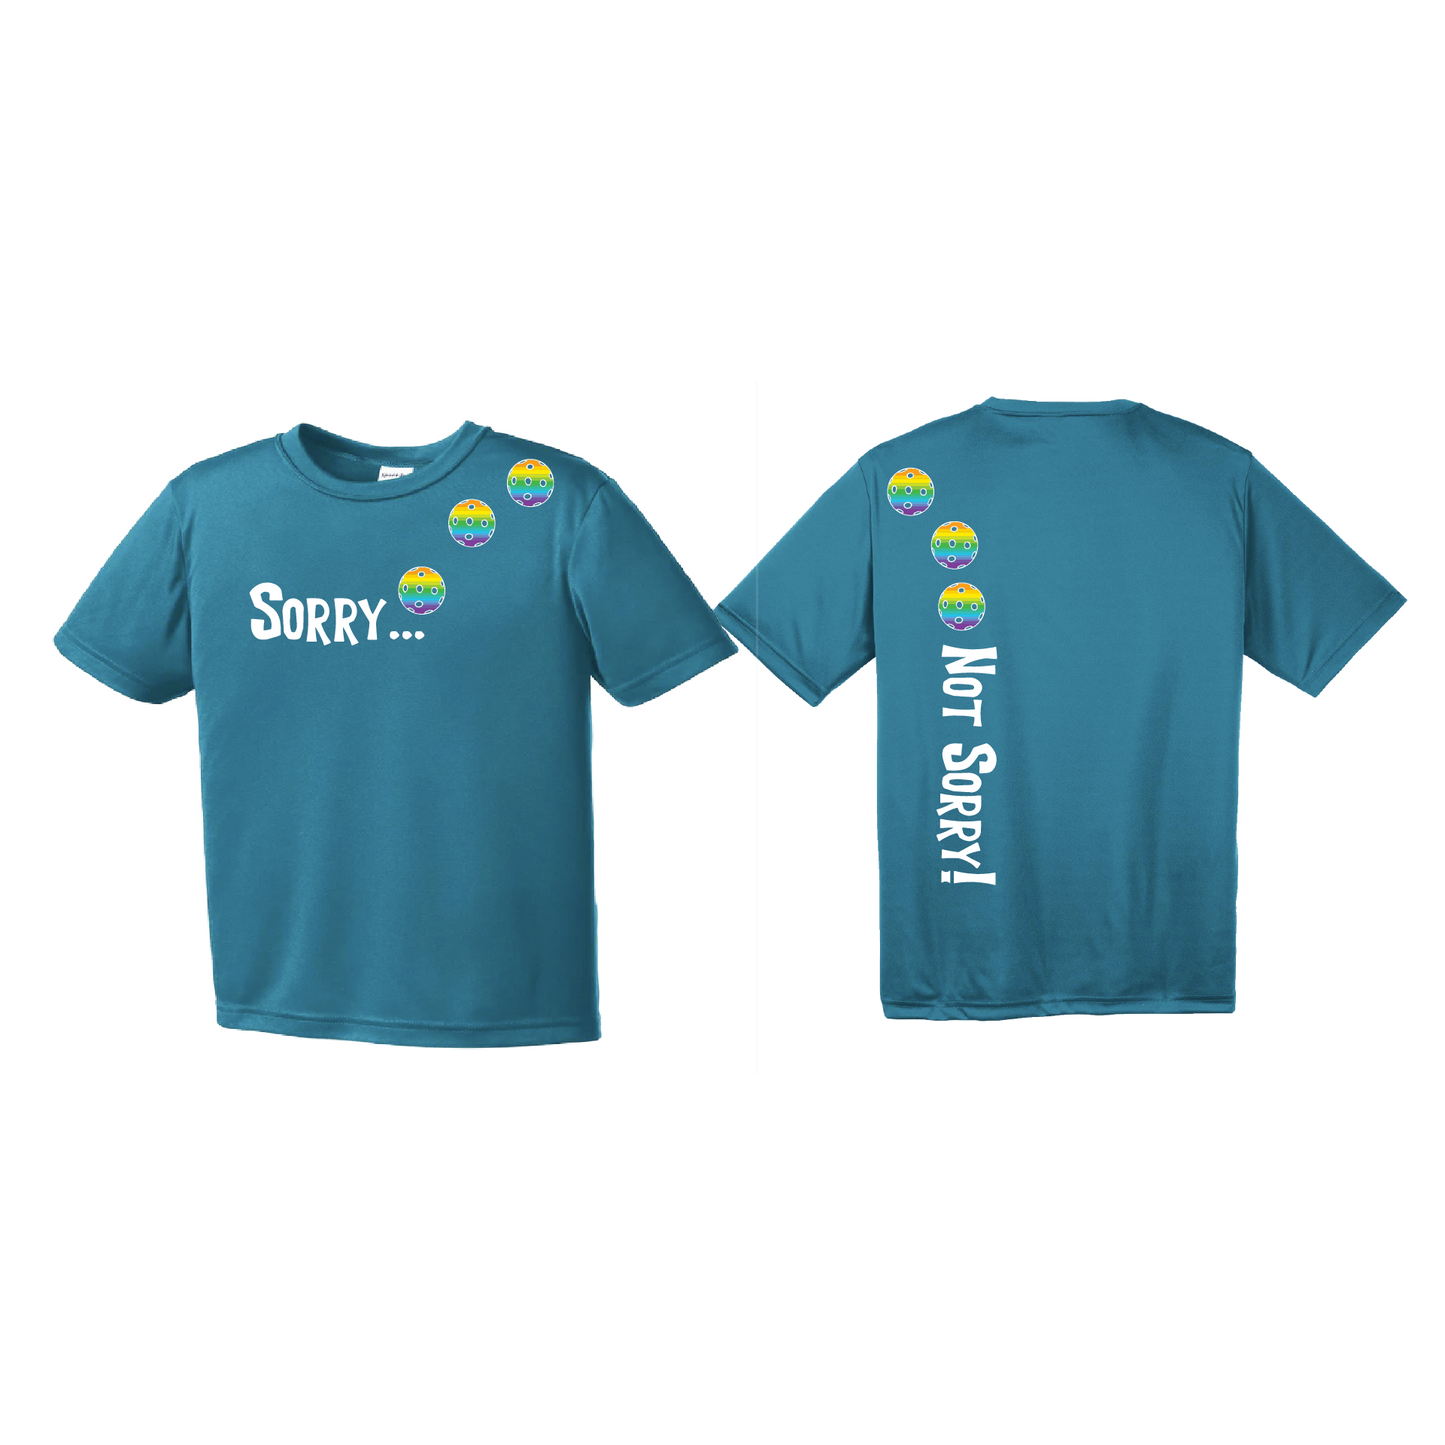 Pickleball Design: Sorry... Not Sorry - Customizable Ball Color - Choose Cyan, Orange or Rainbow. Youth Styles: Short Sleeve  Shirts are lightweight, roomy and highly breathable. These moisture-wicking shirts are designed for athletic performance. They feature PosiCharge technology to lock in color and prevent logos from fading. Removable tag and set-in sleeves for comfort.